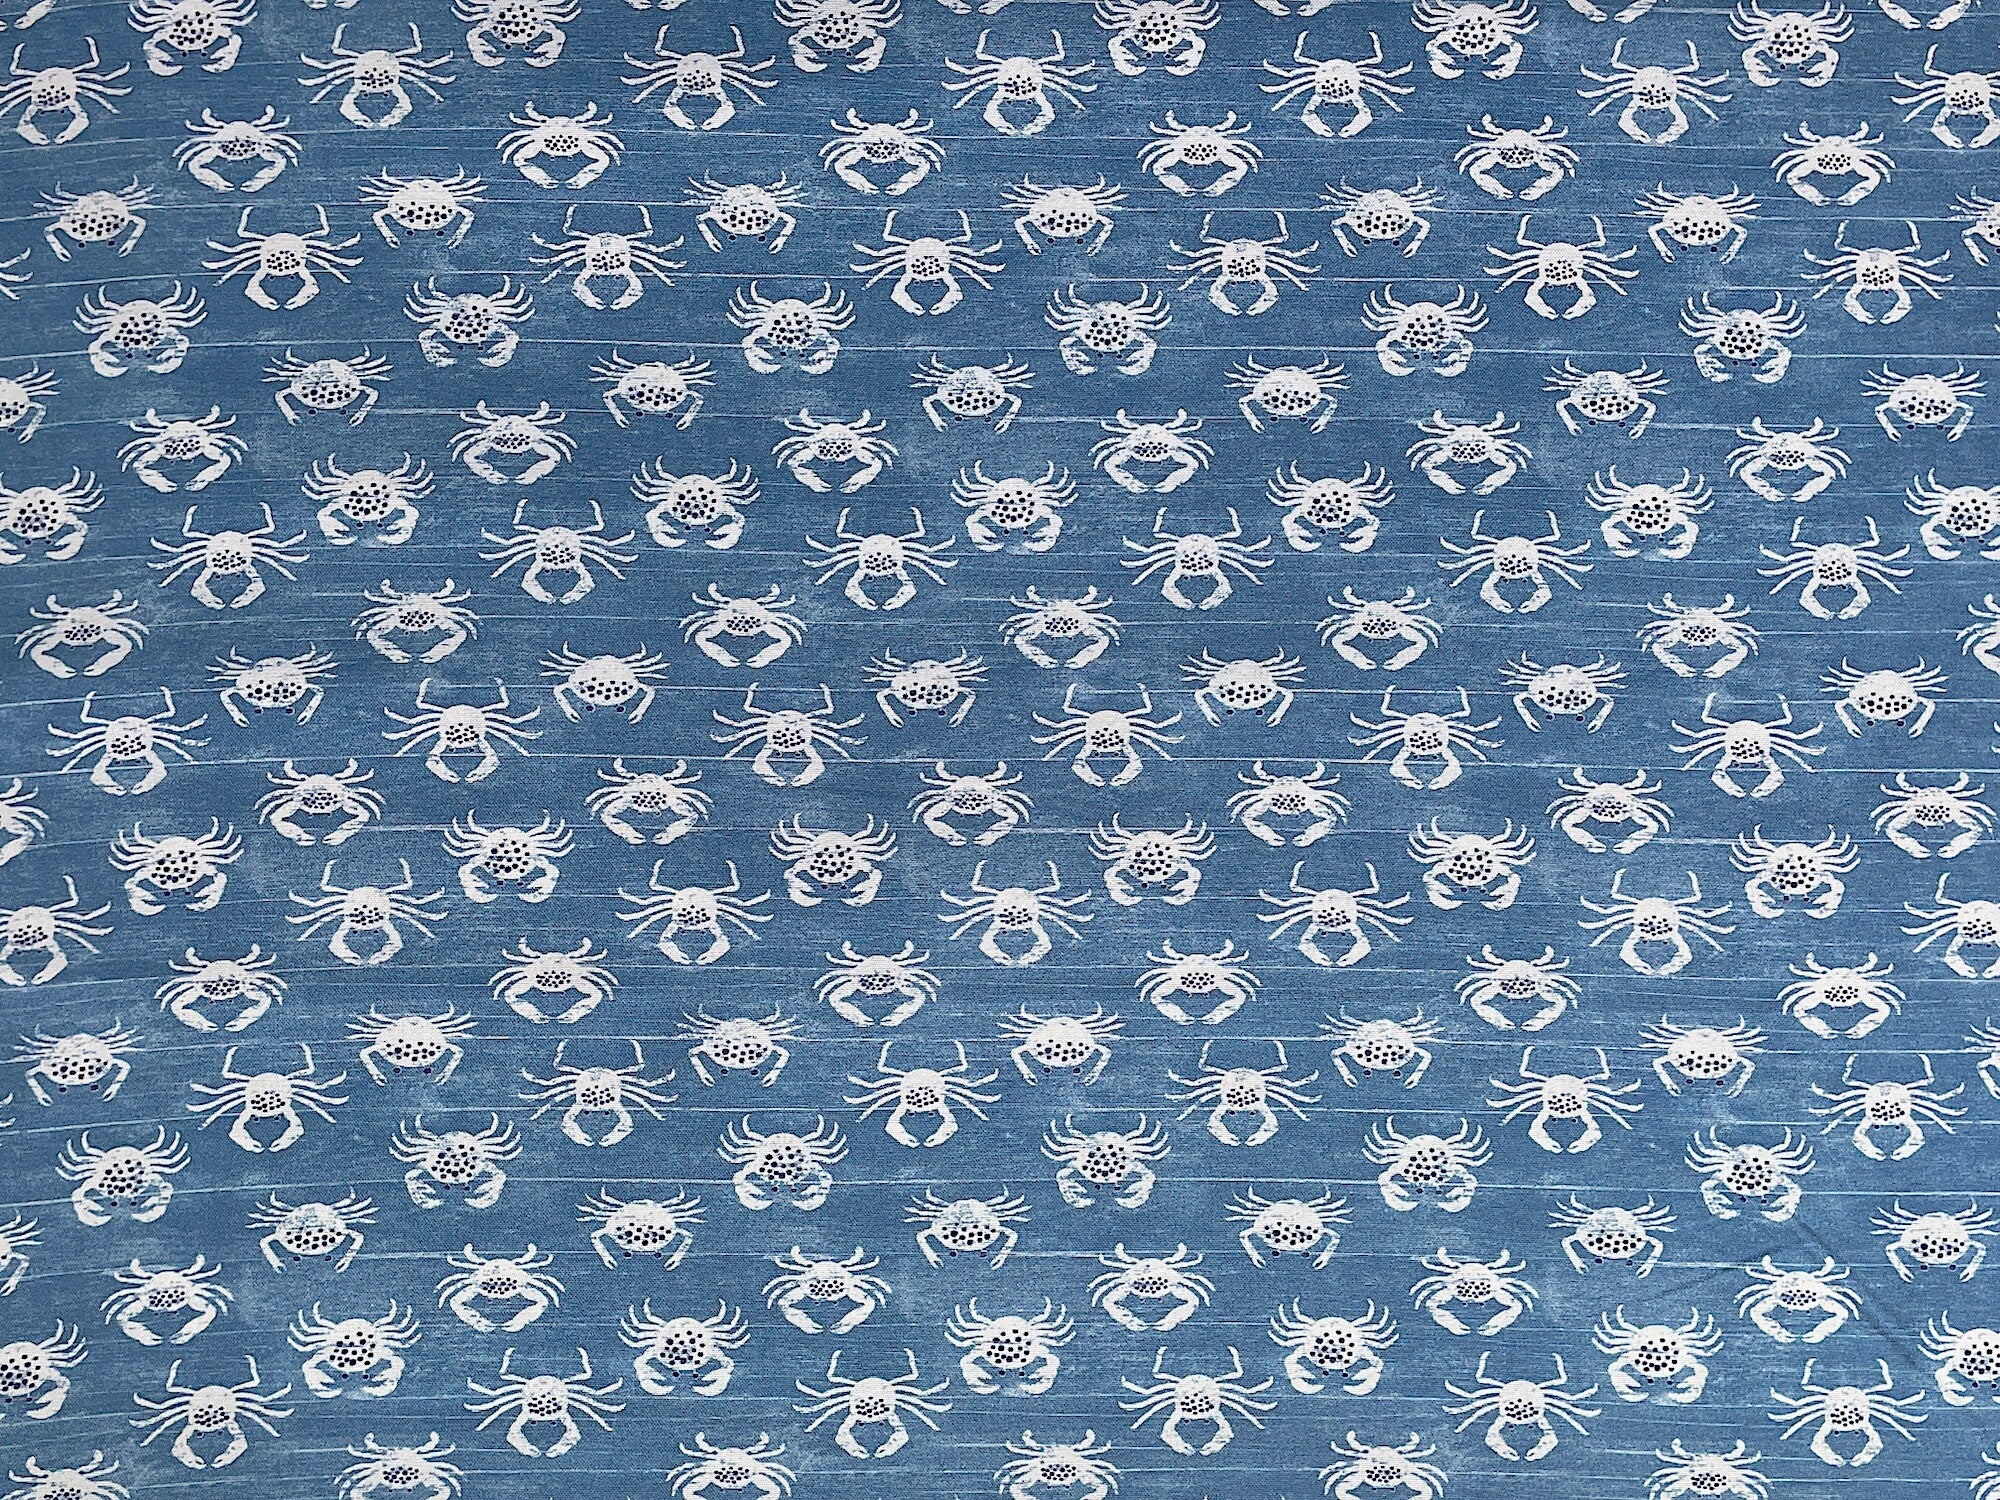 Blue cotton fabric covered with white crabs.